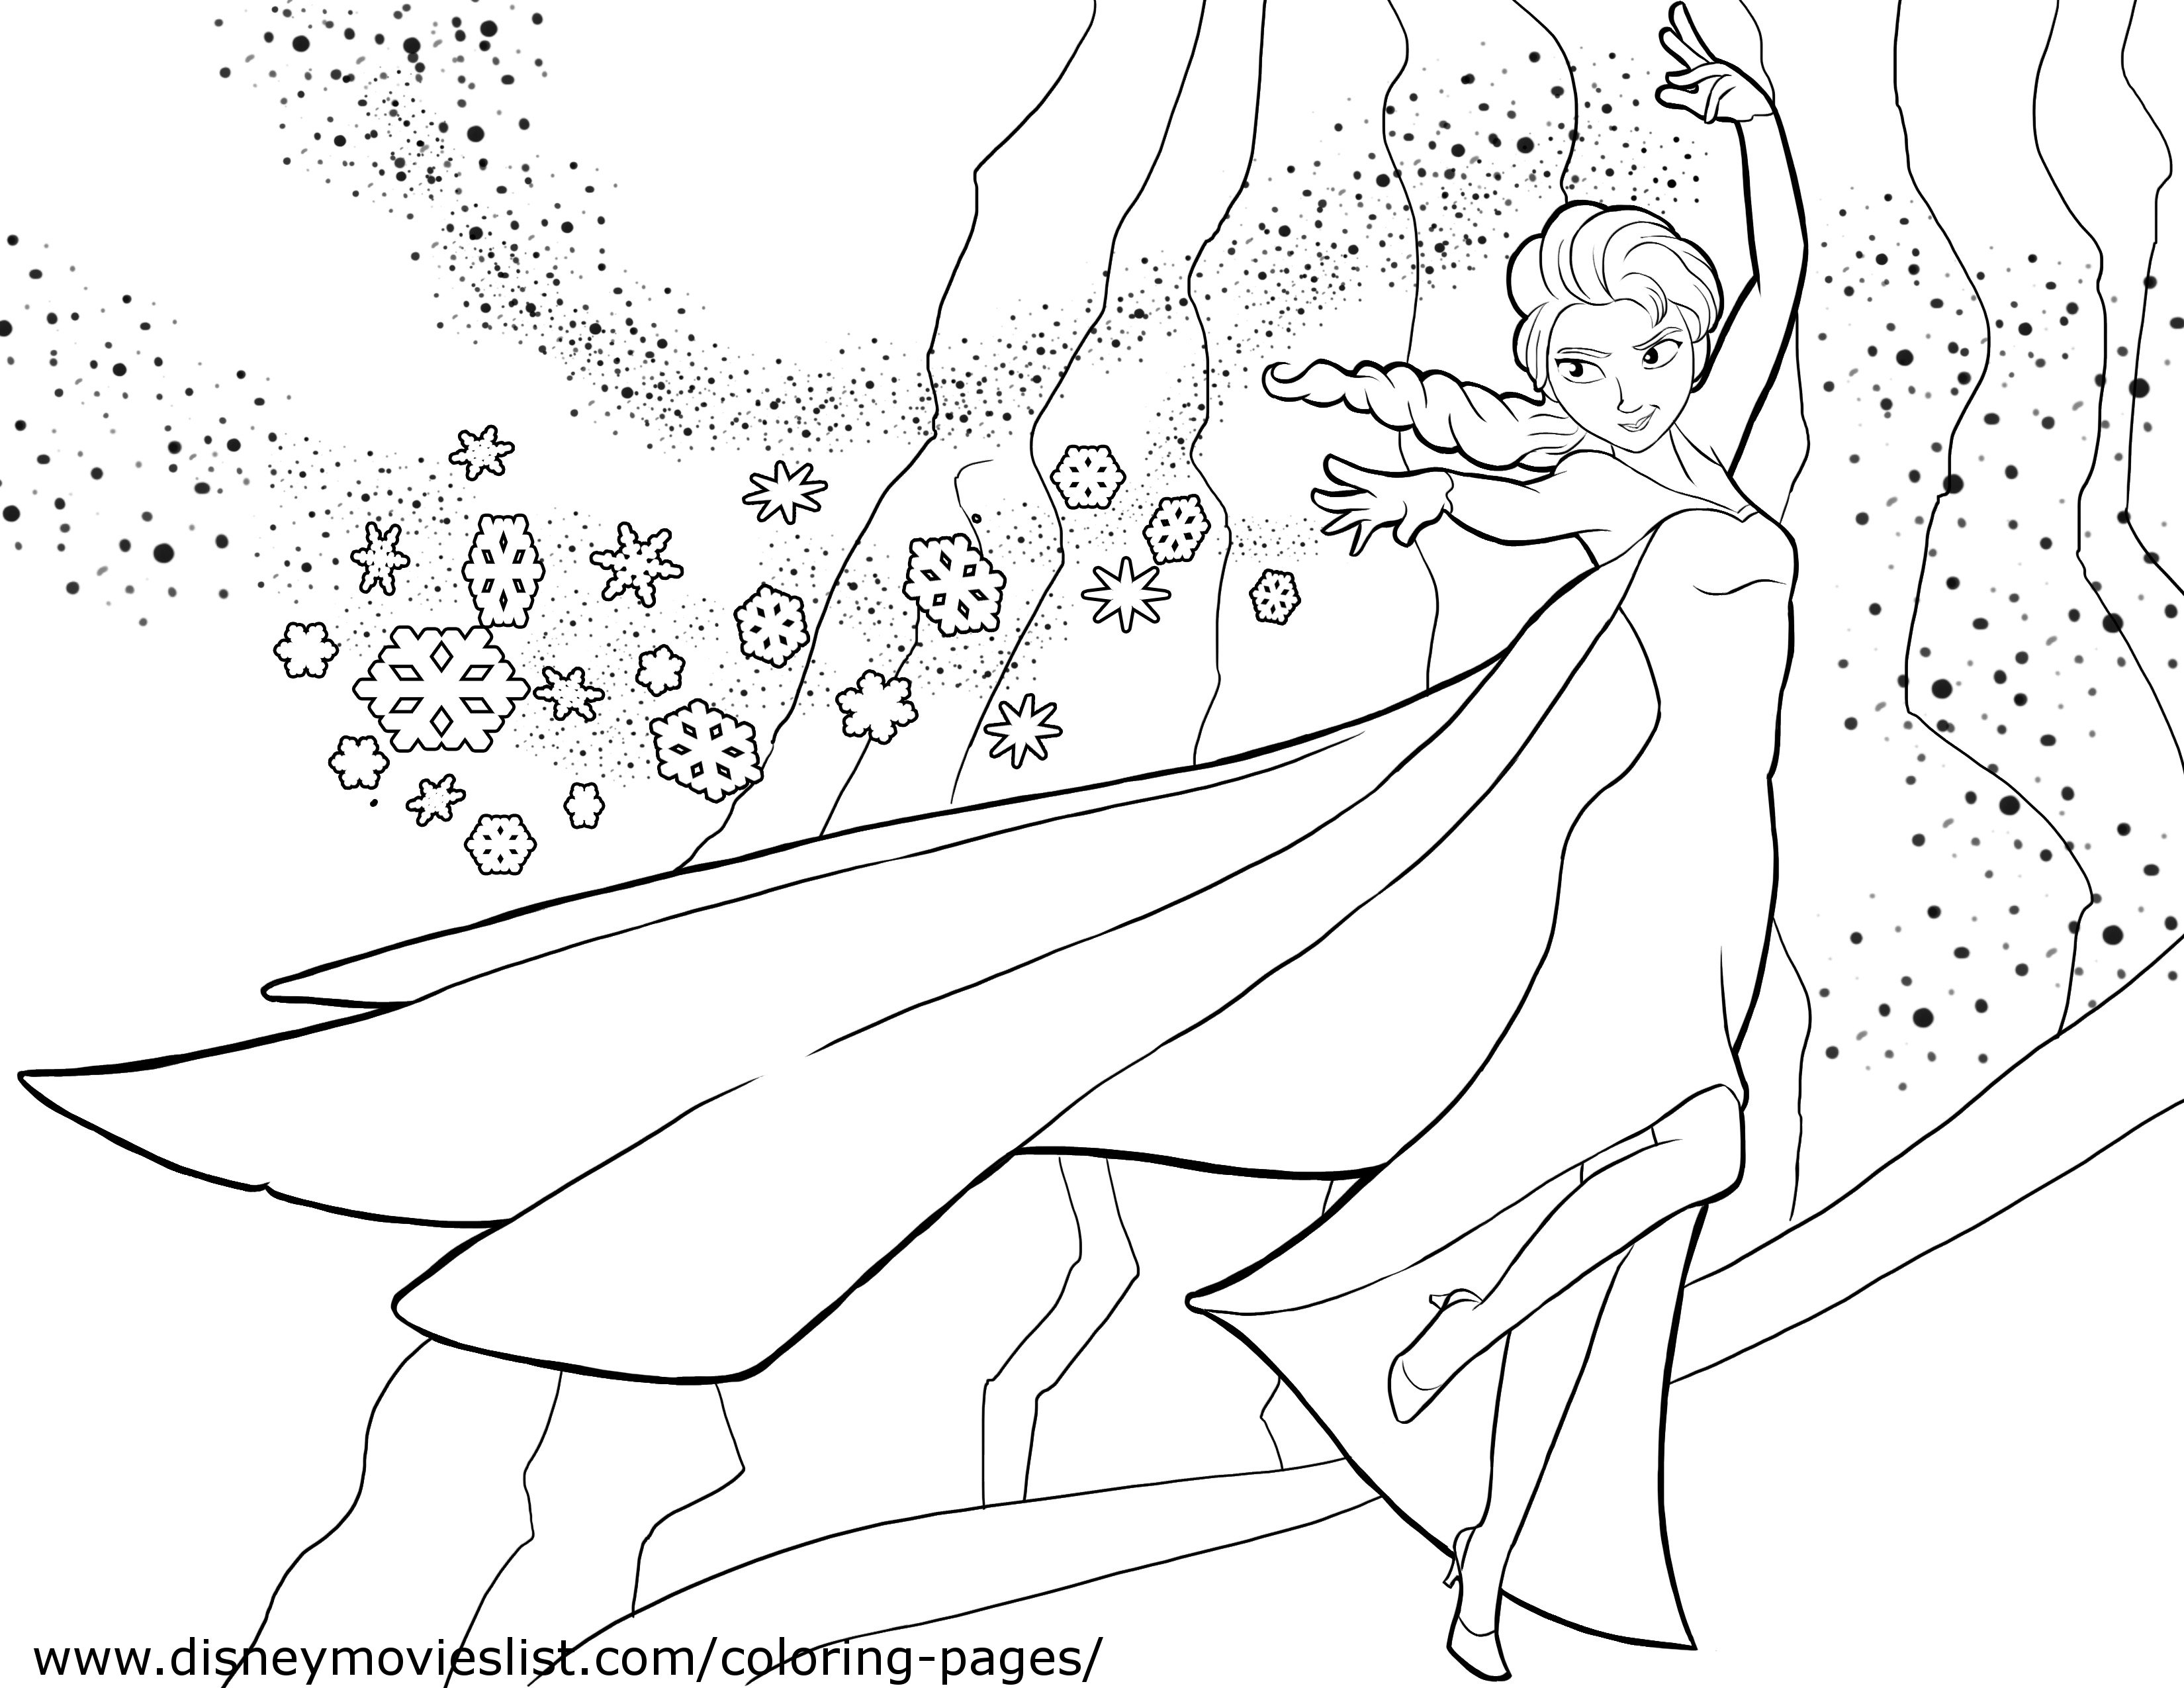 Get Coloring Book For Kids Frozen Background